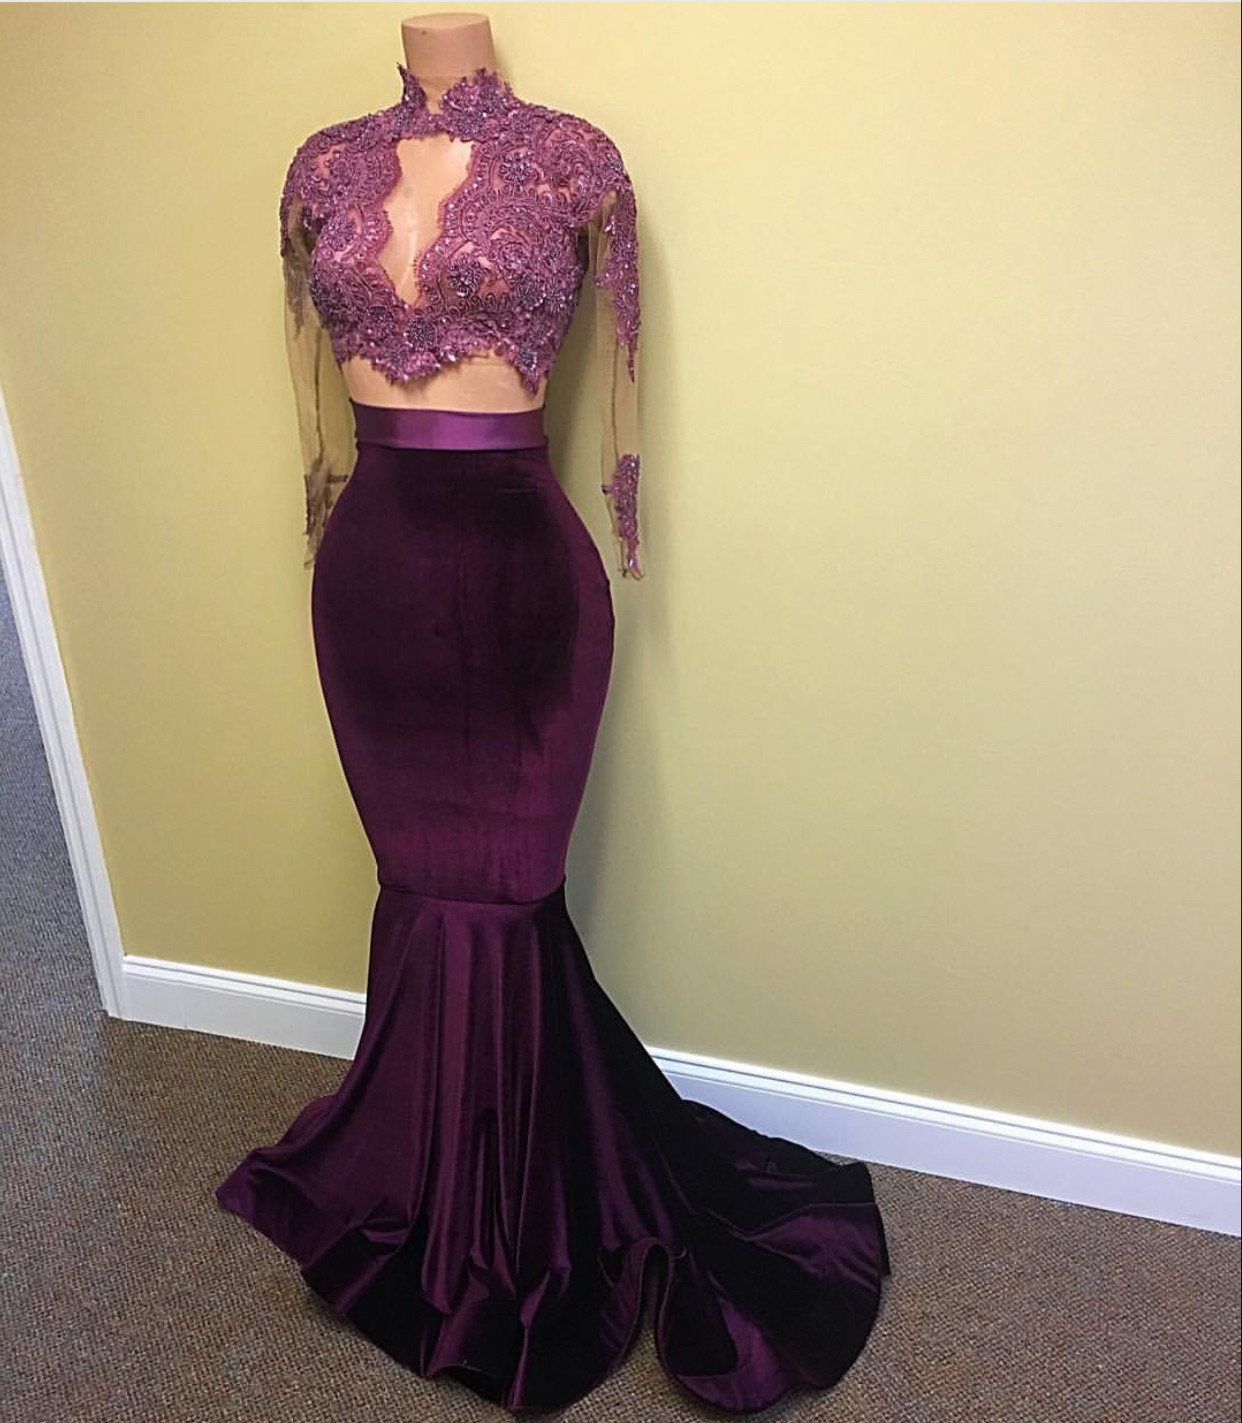 High Neck Prom Dress, Purple Mermaid Prom Dresses,evening Dress,high Quality Graduation Dresses,wedding Guest Prom Gowns, Formal Occasion